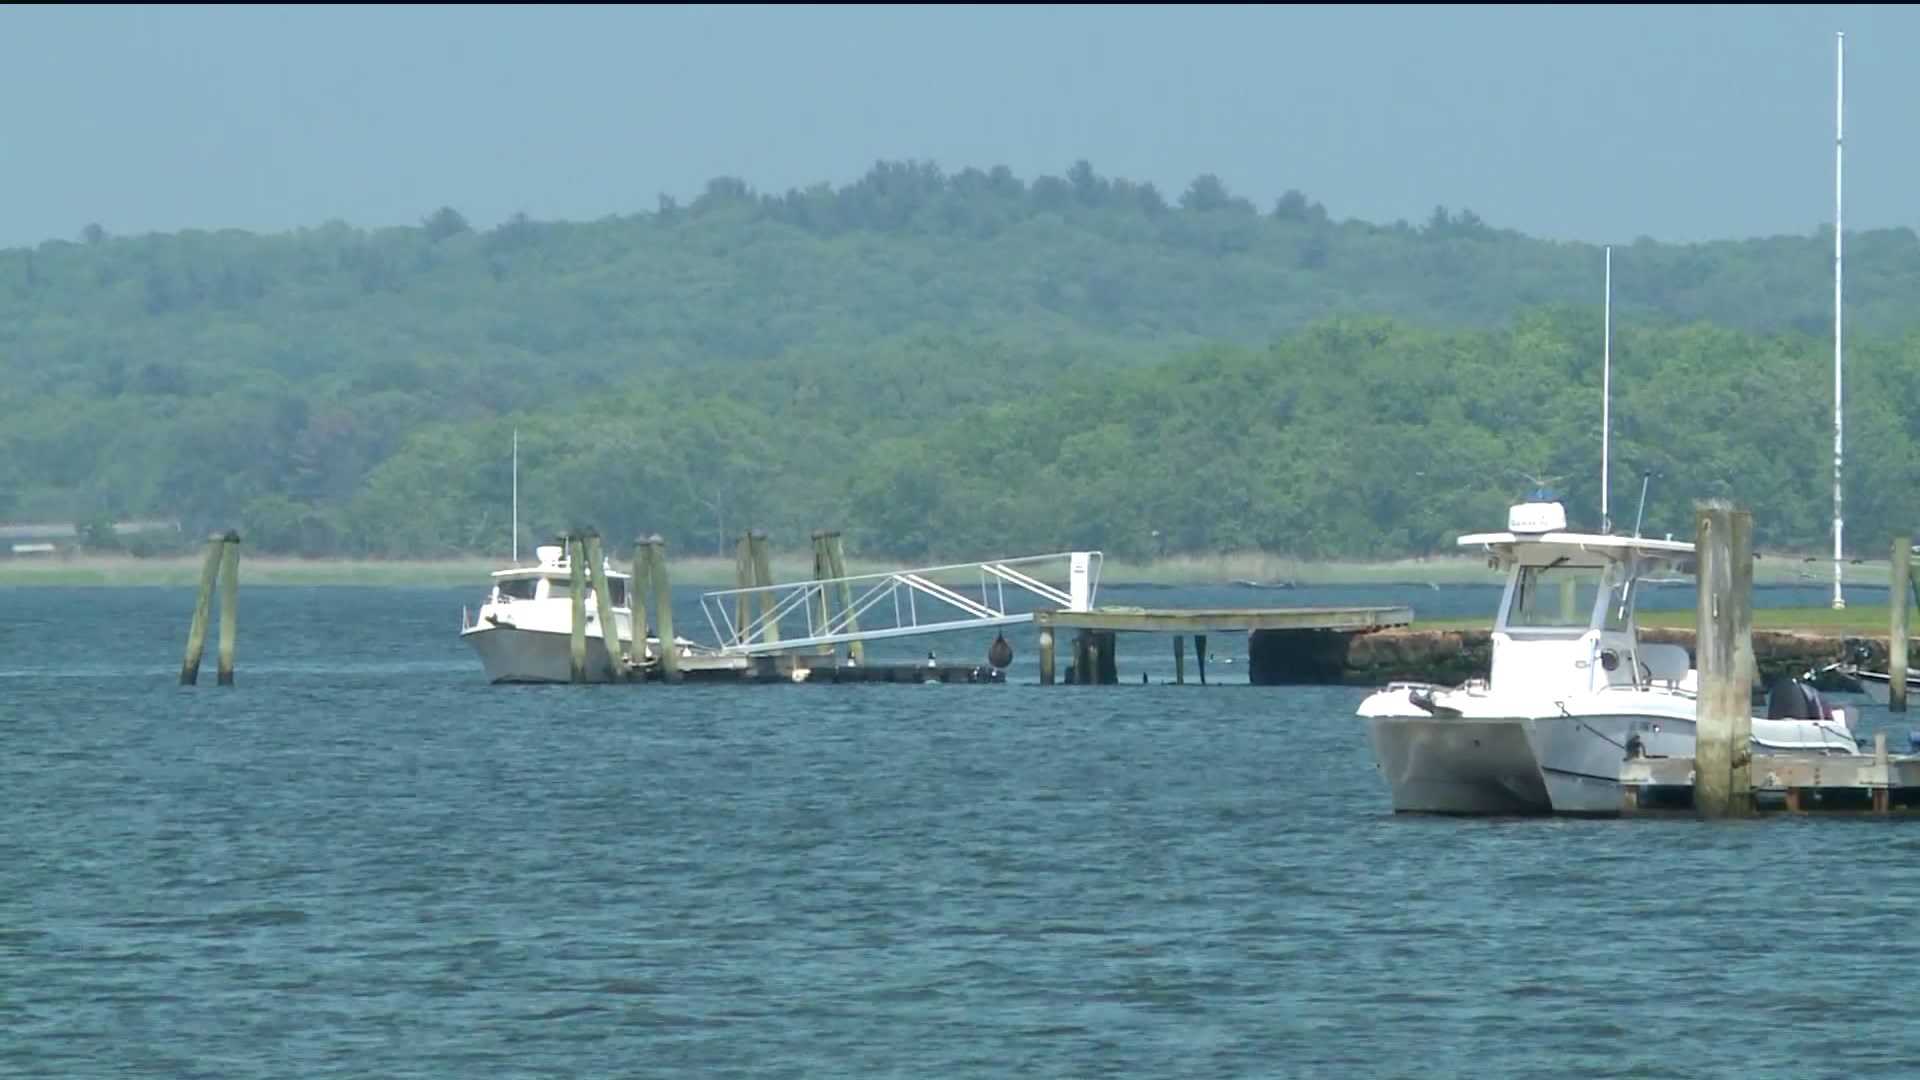 Authorities give update on search for missing kayaker in Old Saybrook